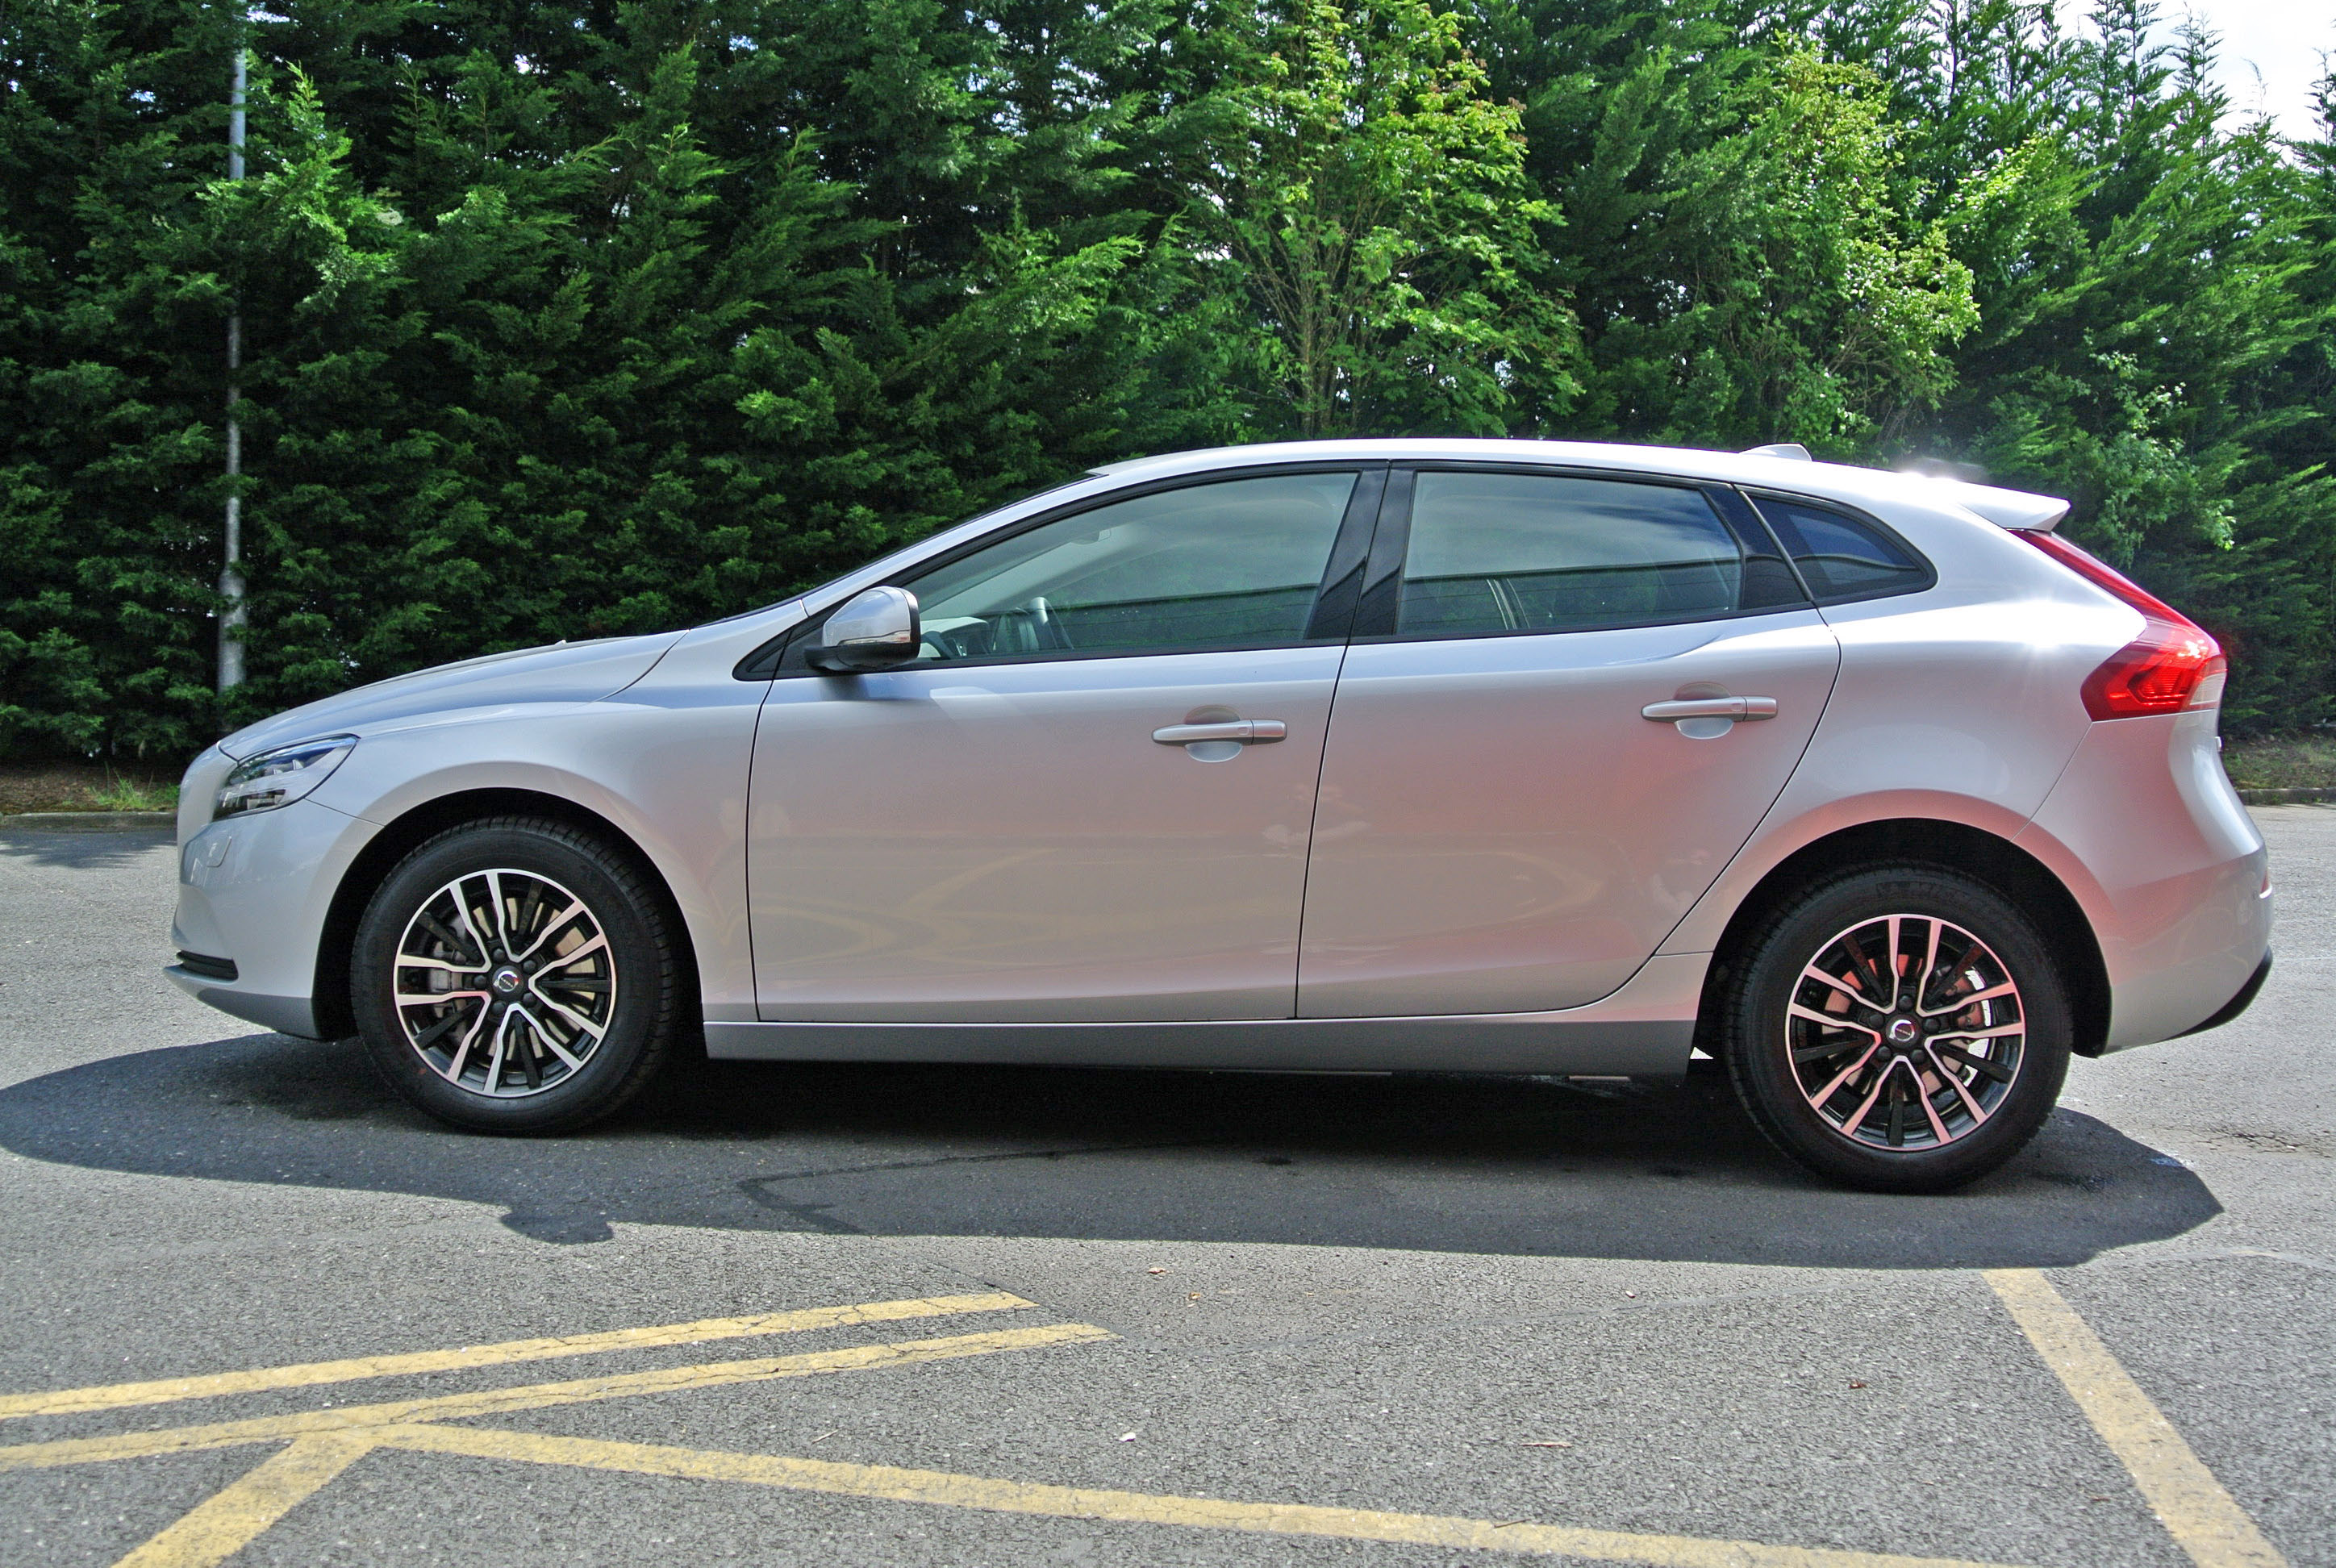 Volvo V40 stand-alone stance monsters a core safety message